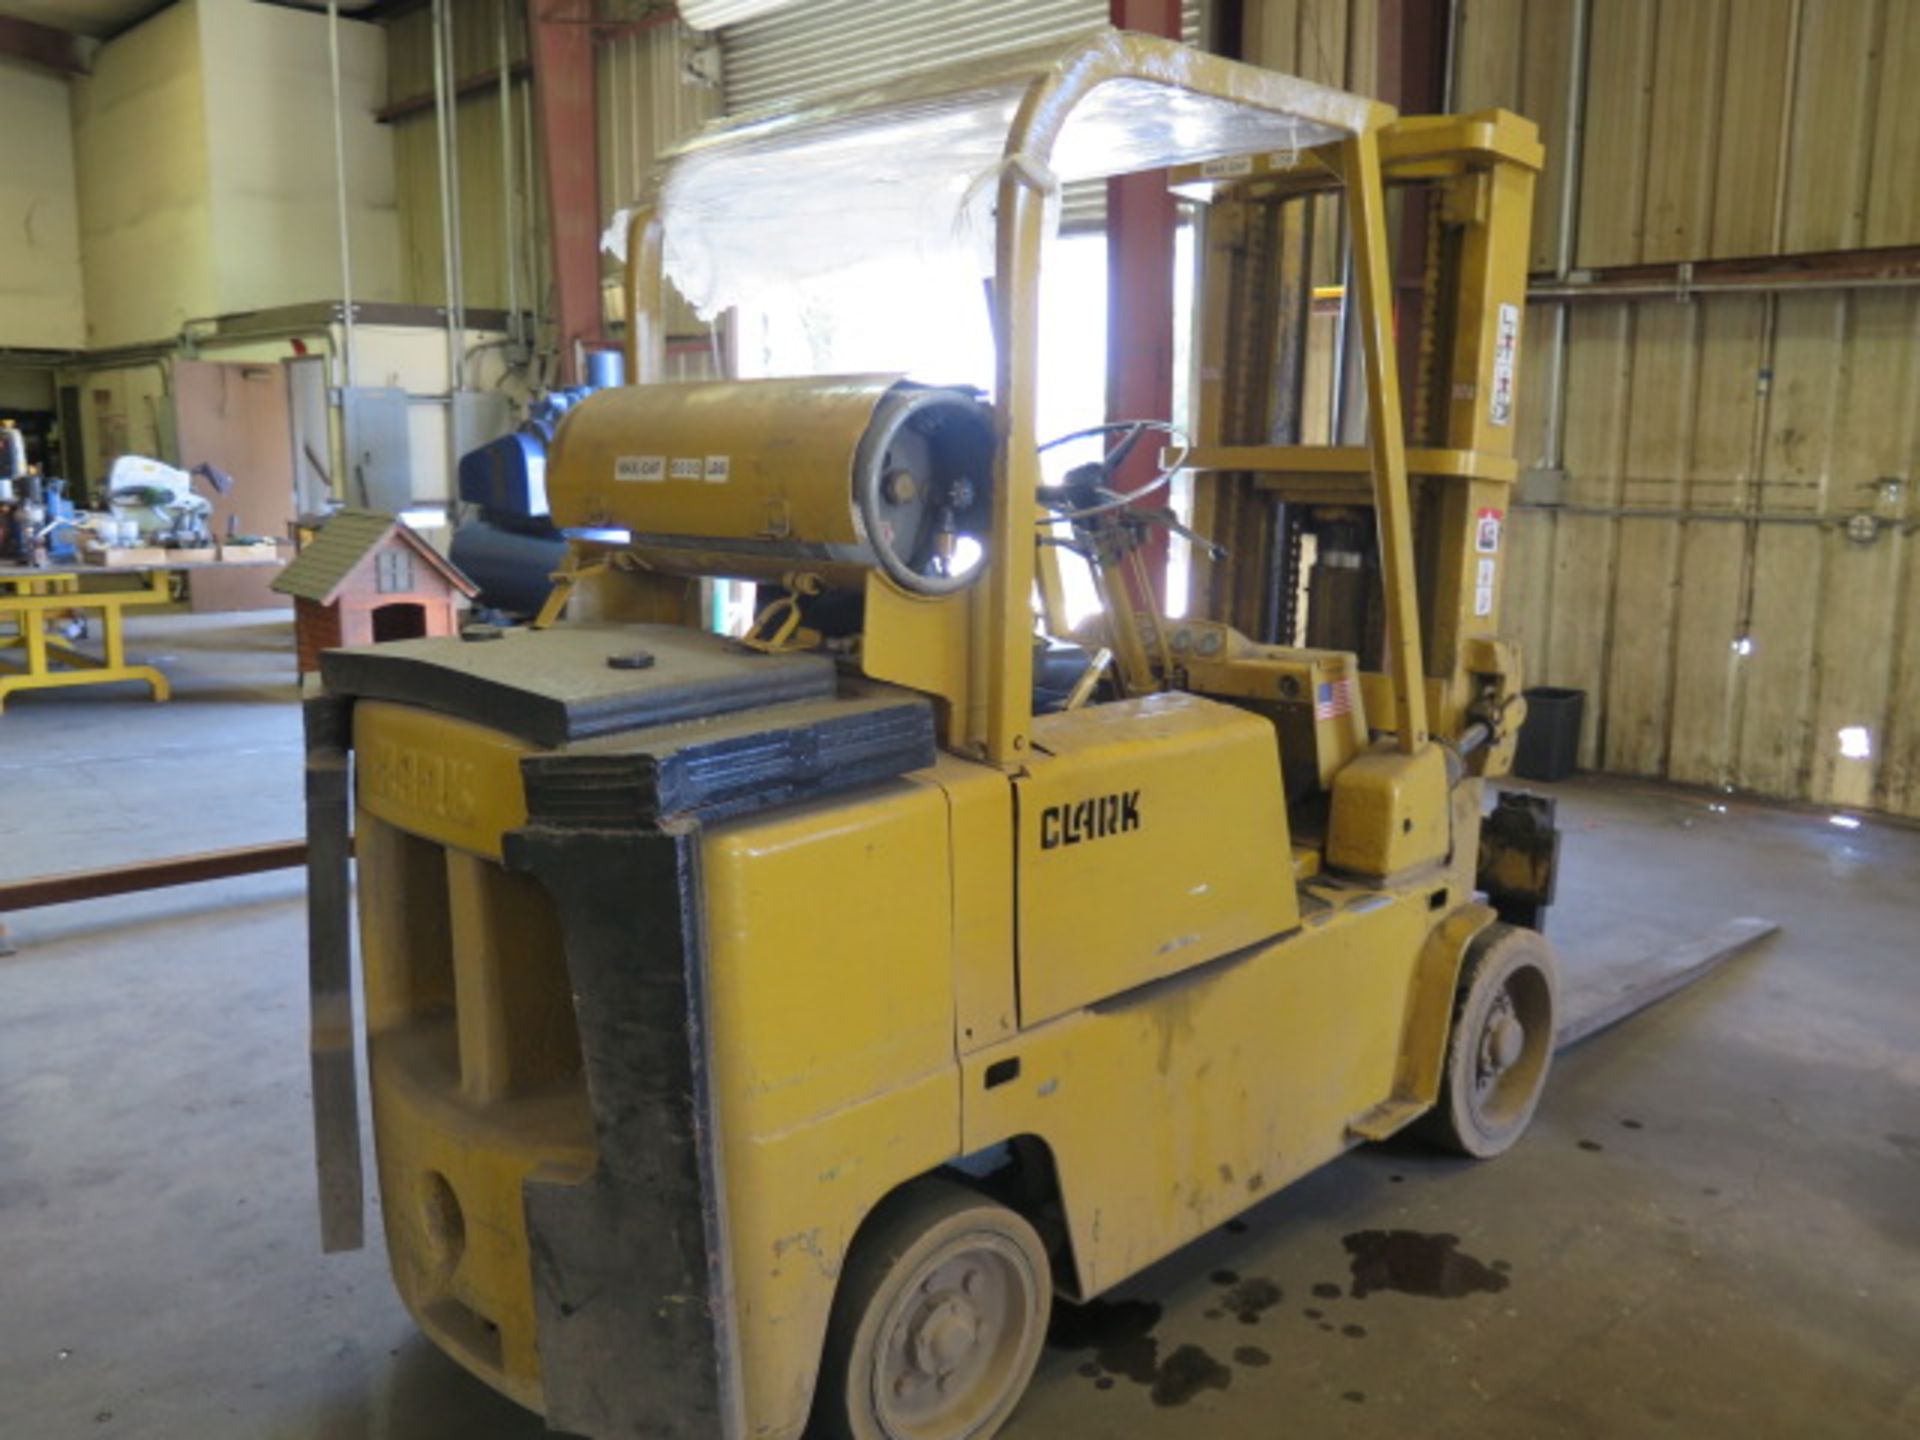 Clark C500-80 7250 Lb Cap LPG Forklift s/n 685-285-22511072 w/ 3-Stage, 180" Lift Height, SOLD AS IS - Image 4 of 13